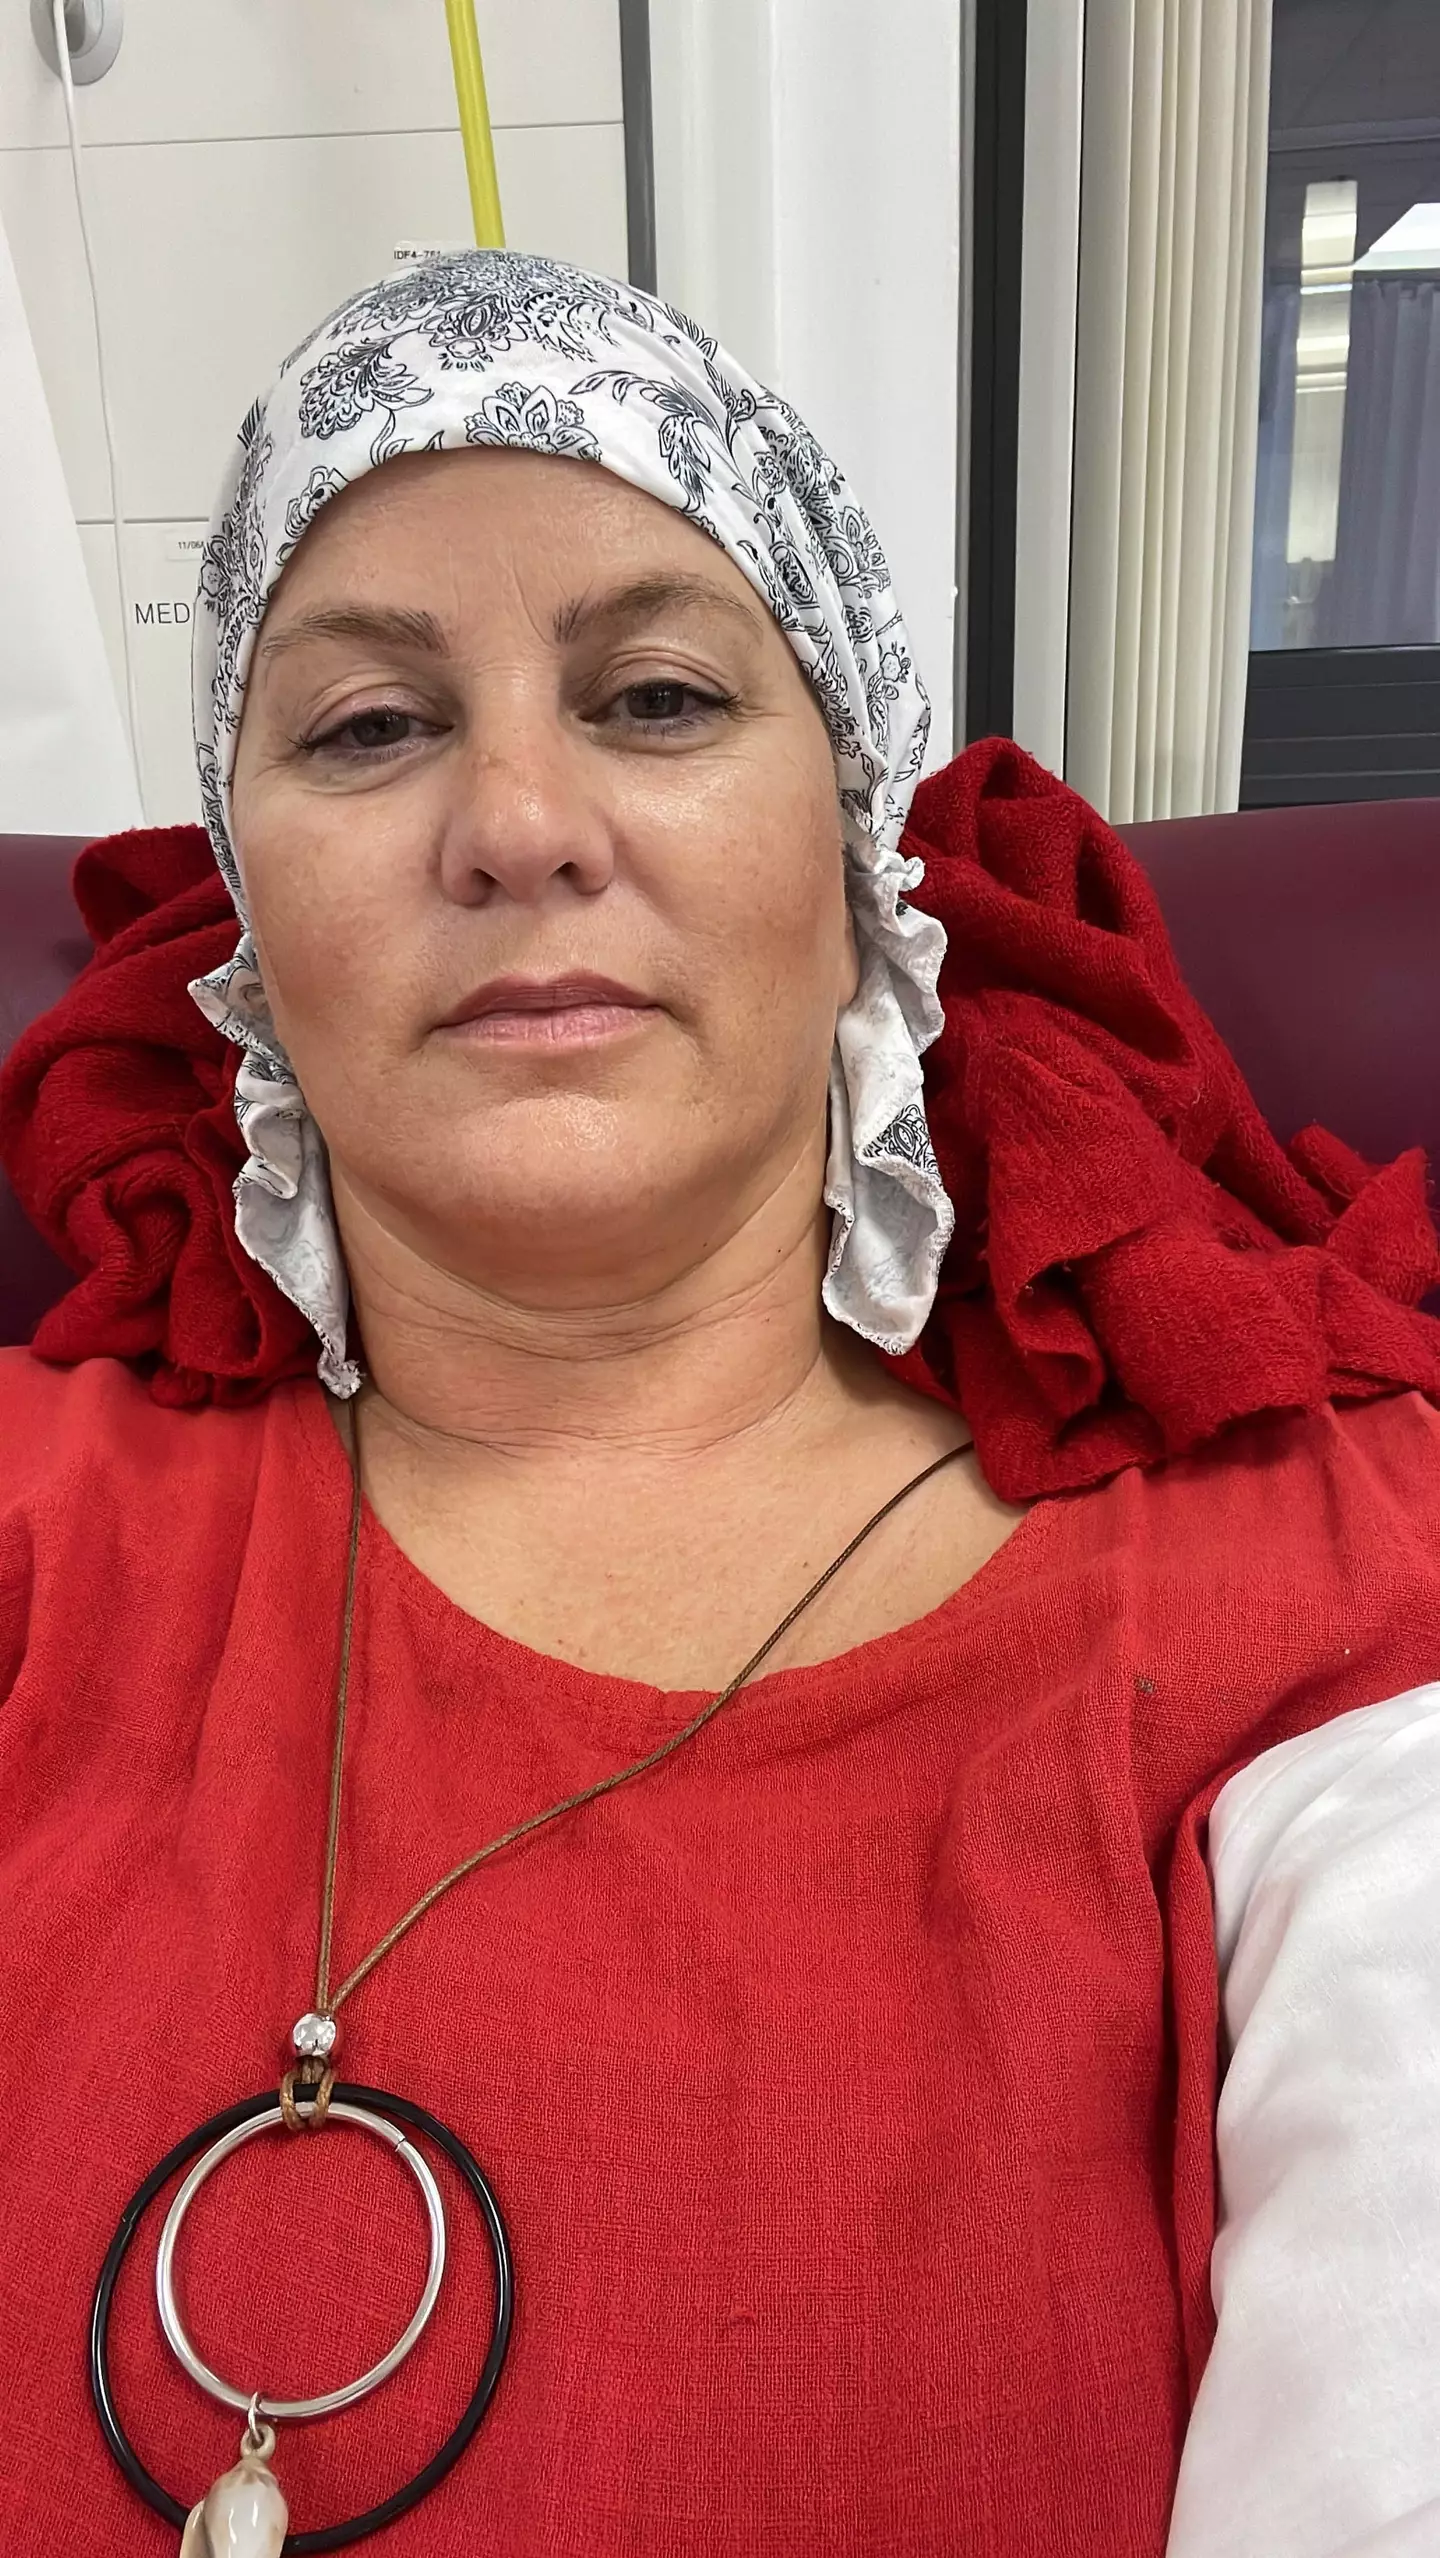 The mum-of-five is battling her second diagnosis of cancer.